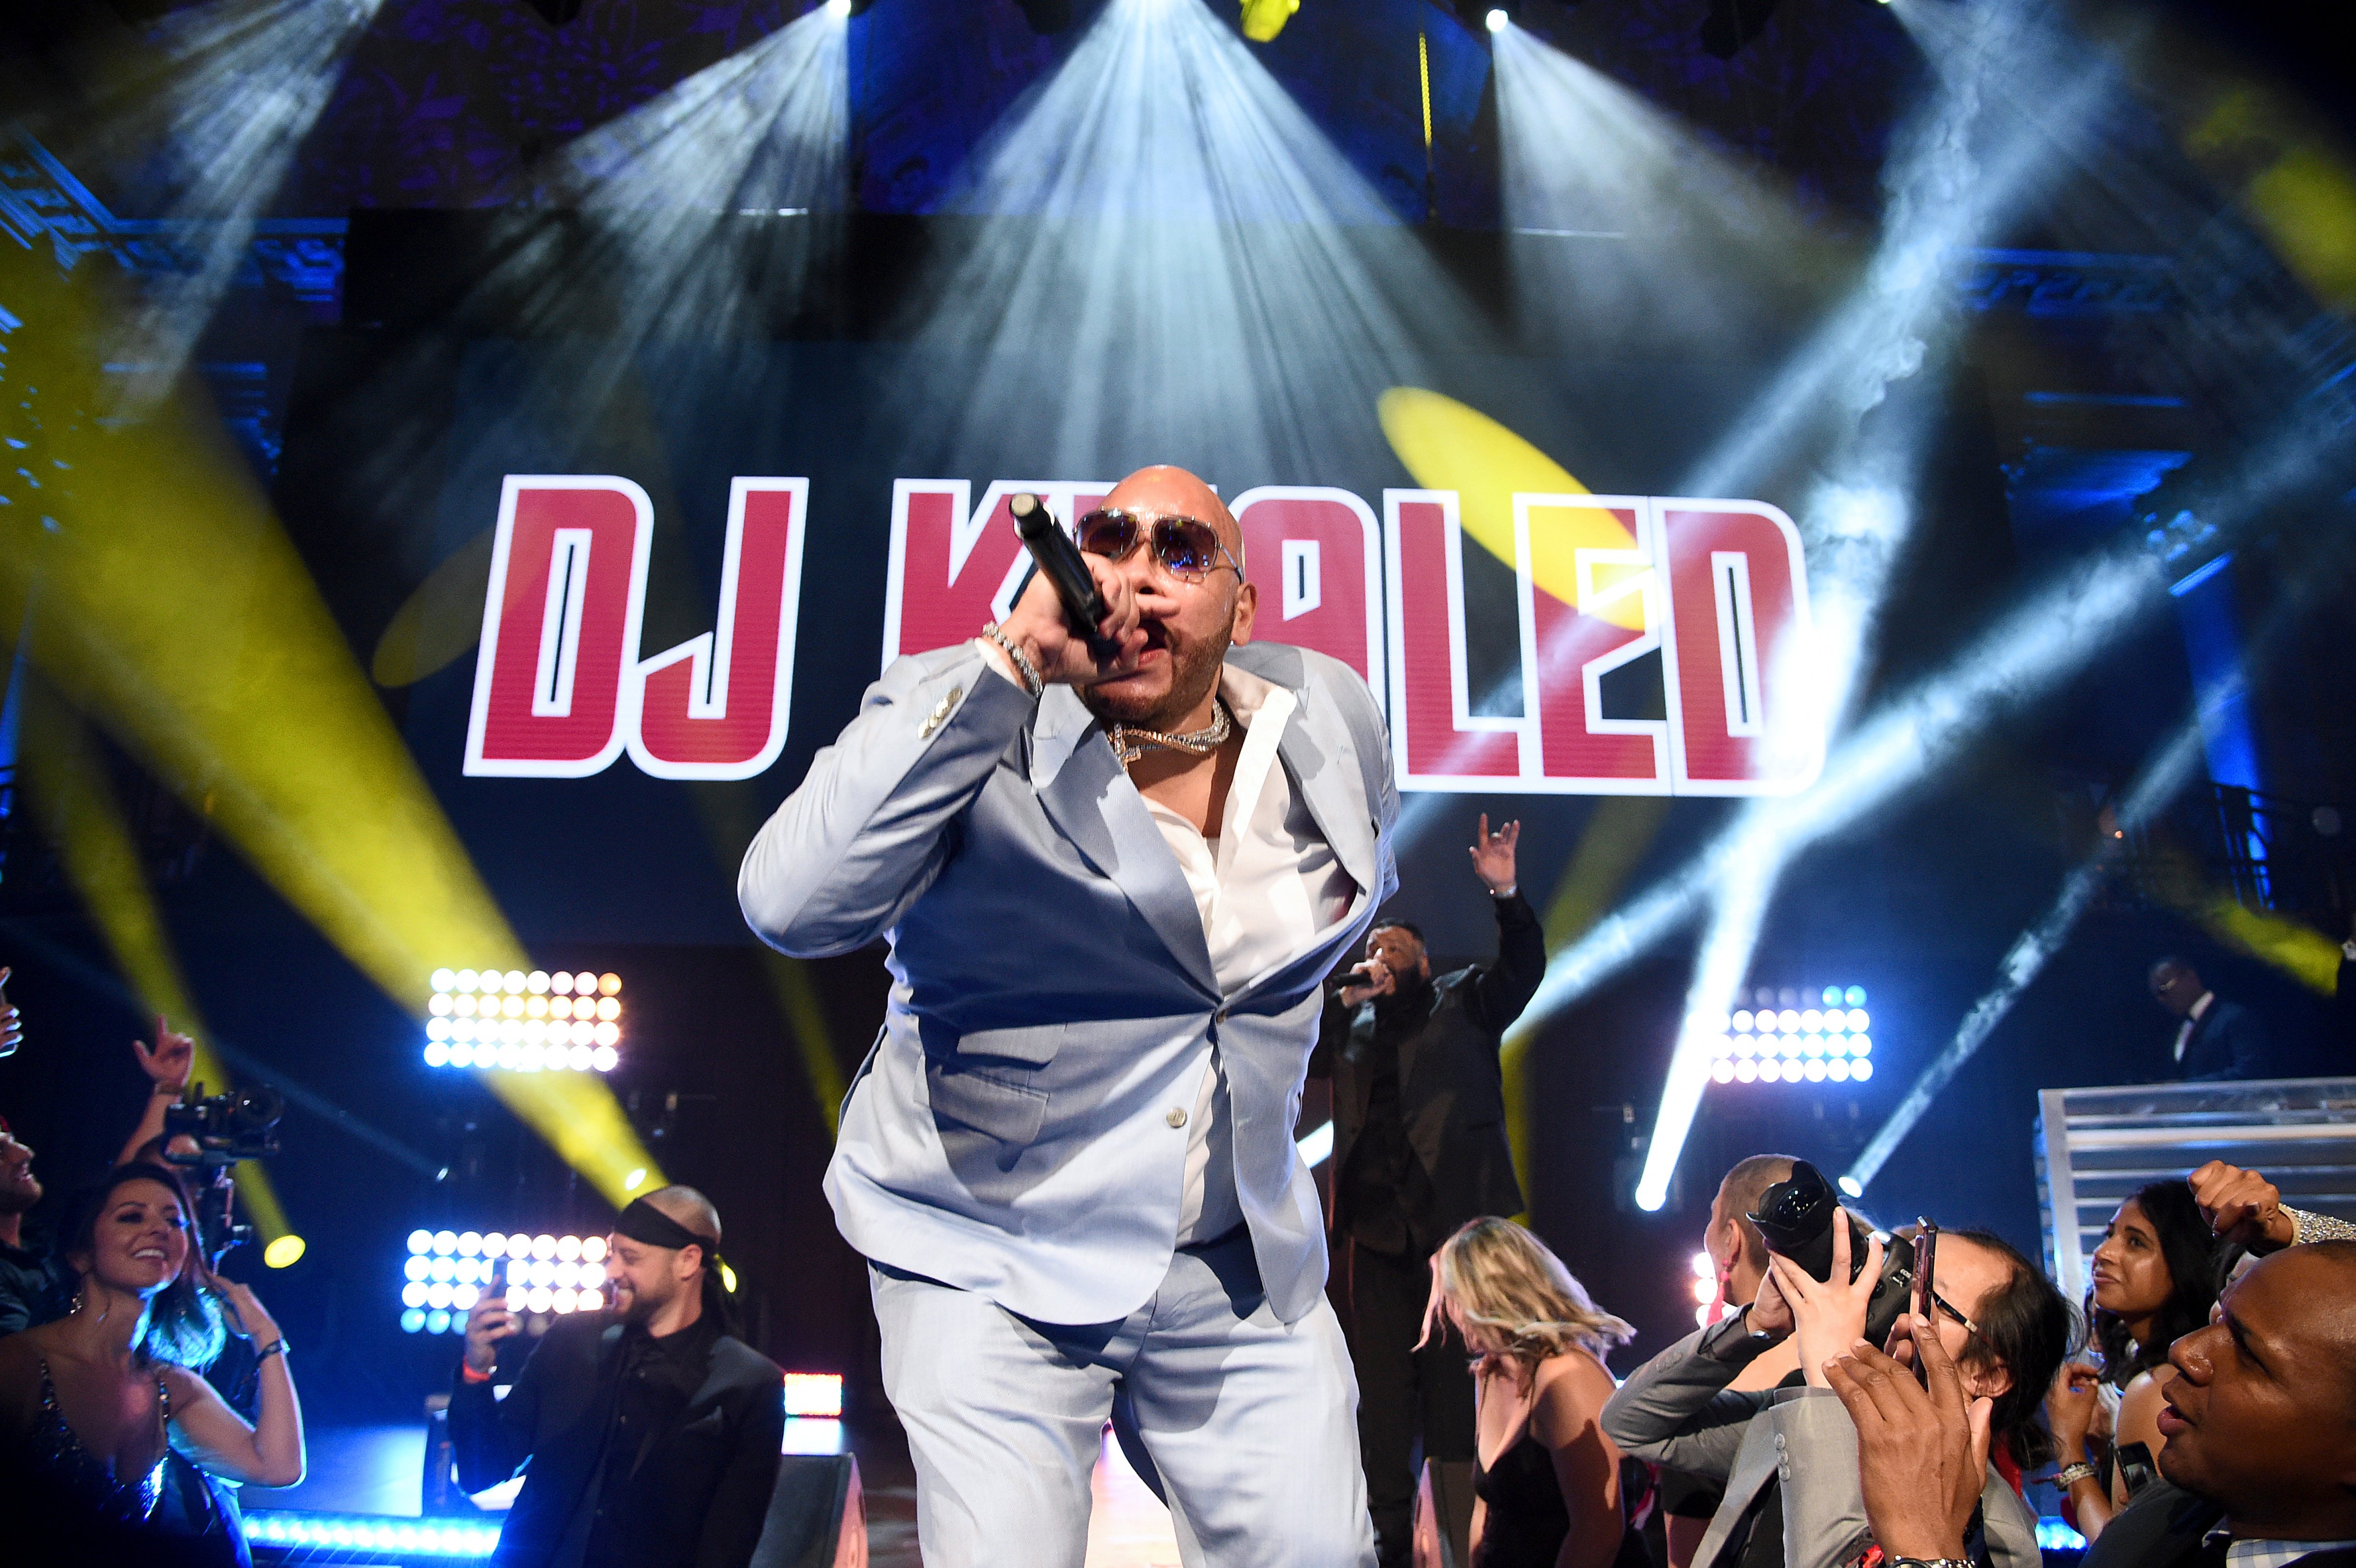 Fat Joe performs on stage during Rihanna's 5th Annual Diamond Ball Benefitting The Clara Lionel Foundation at Cipriani Wall Street on September 12, 2019 in New York City. (Dimitrios Kambouris—Getty Images for Diamond Ball)